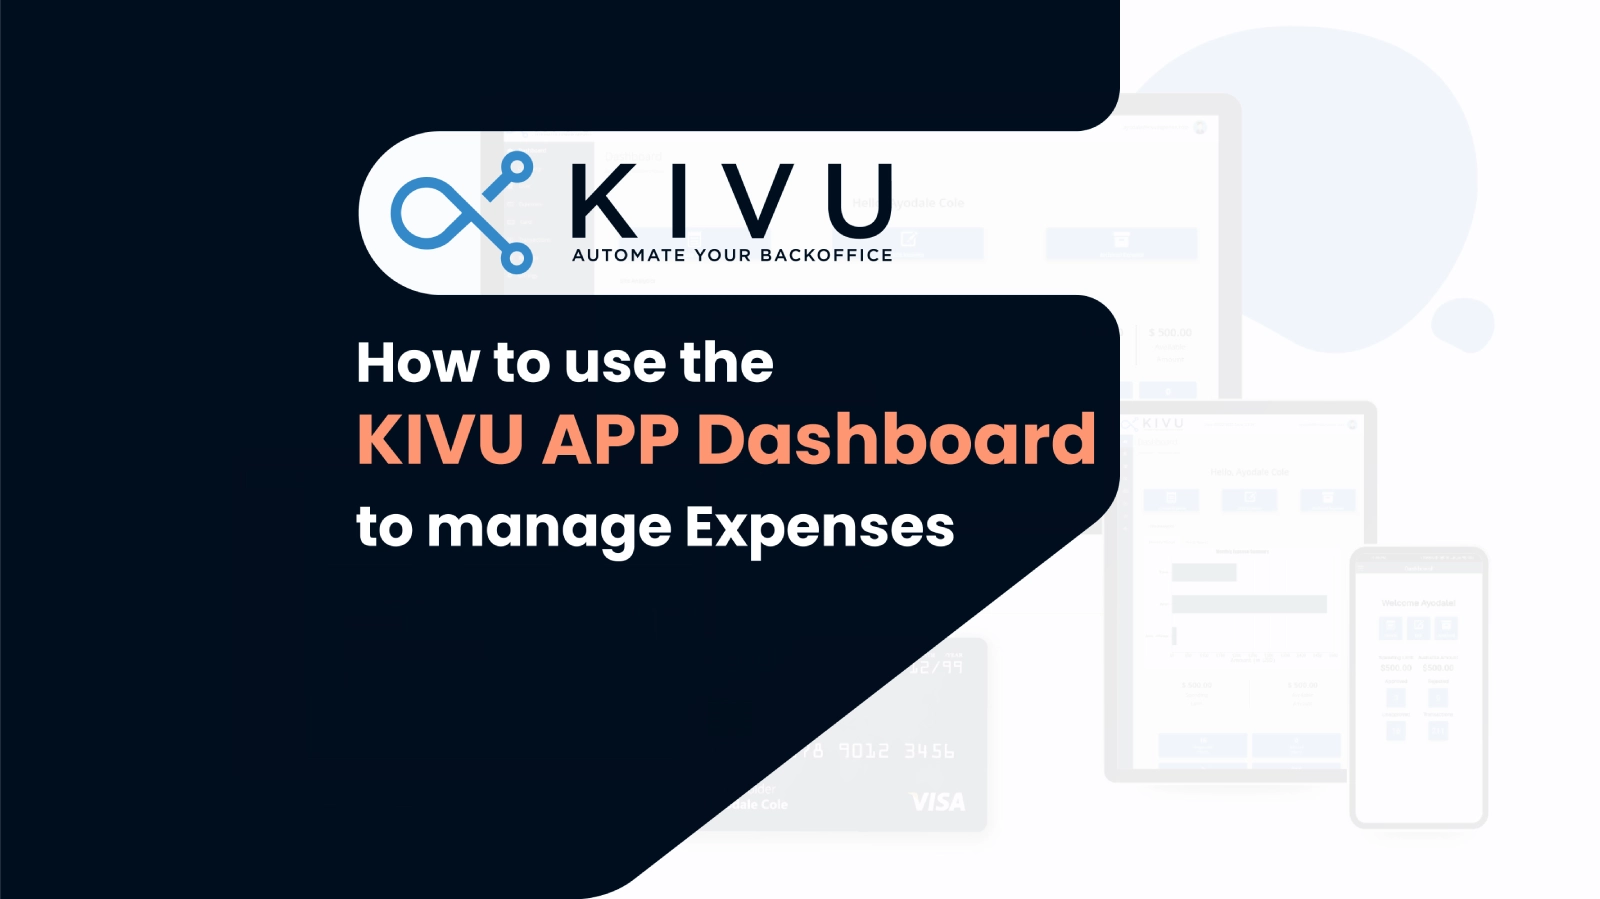 How to Use the KIVU App Dashboard to Manage Your Expenses on the Go